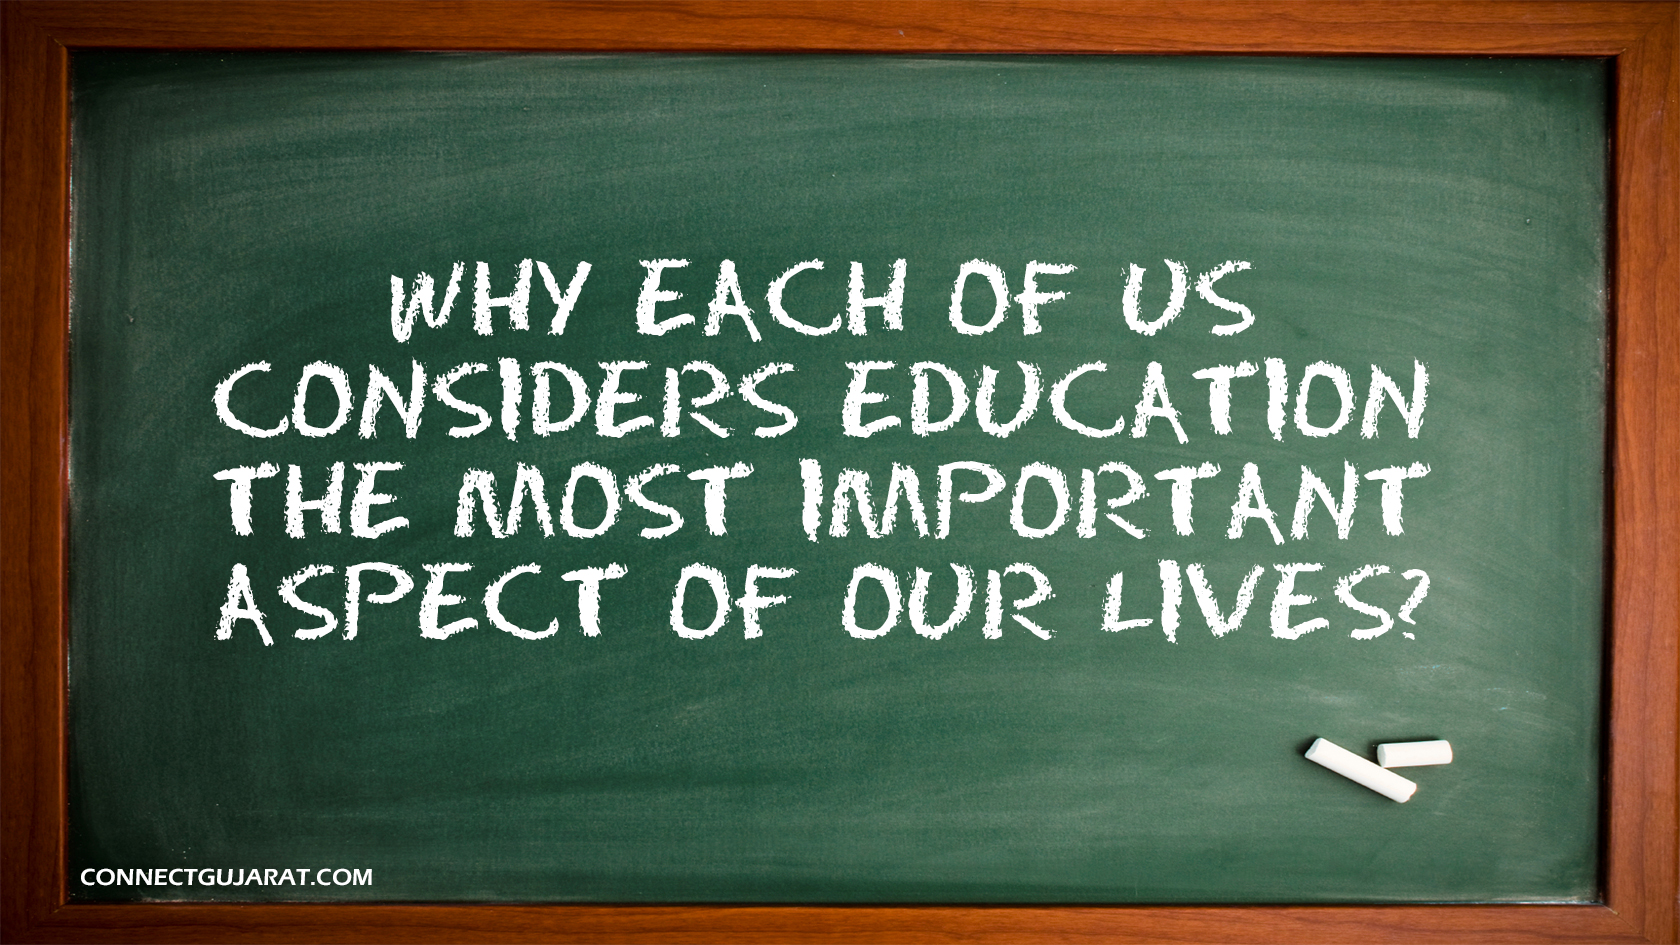 Why each of us considers education the most important aspect of our lives?